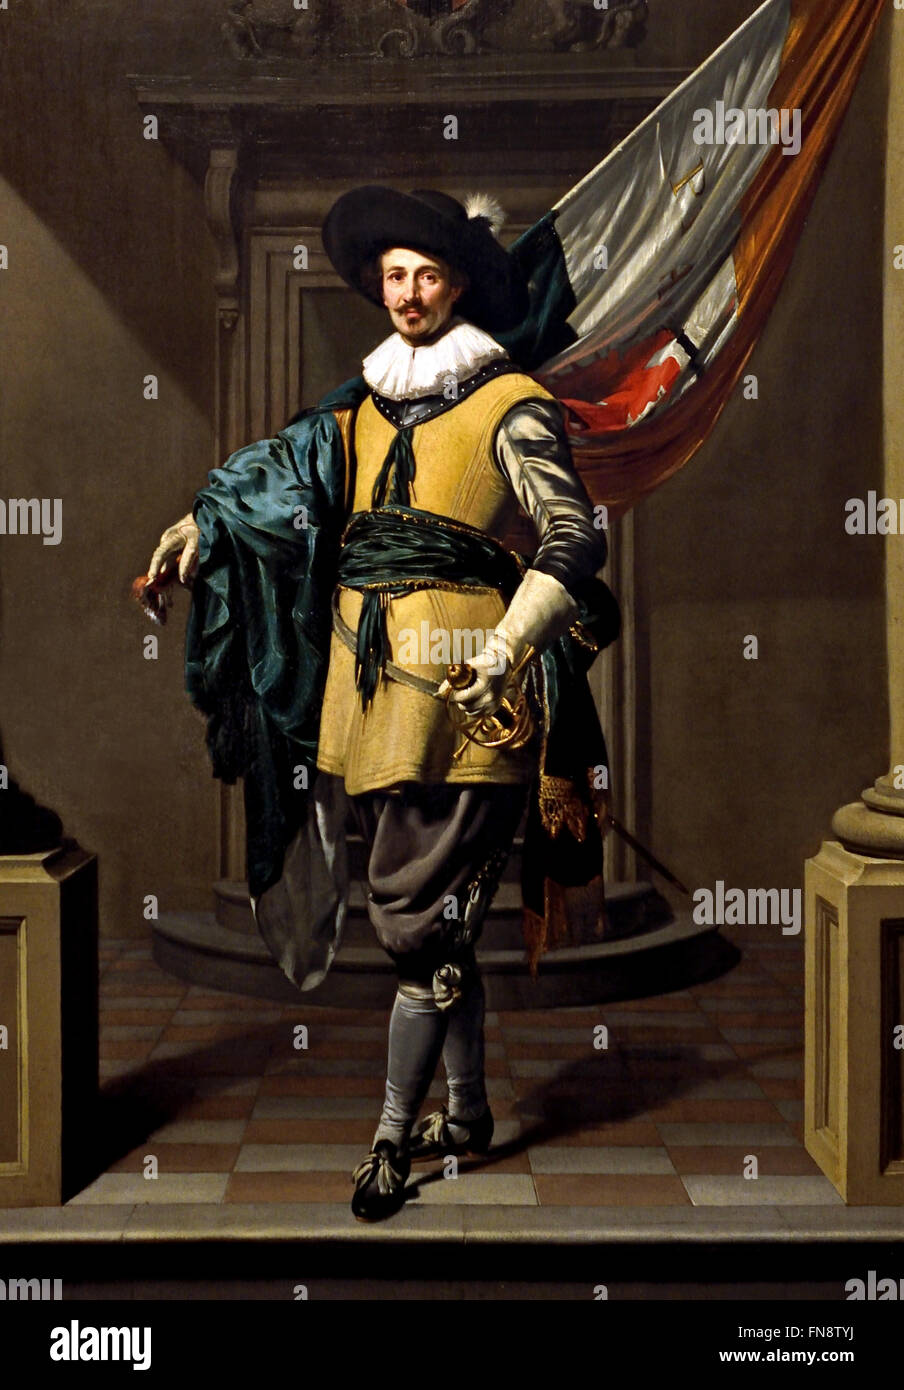 Portrait of Loef Vredericx (1590-1668) as an Ensign 1626  Thomas de Keyser, Dutch Netherlands ( In his daily life, Loef Vredericx was a silversmith, but here he is portrayed in the honourable position of ensign of the Amsterdam civic militia ) Stock Photo